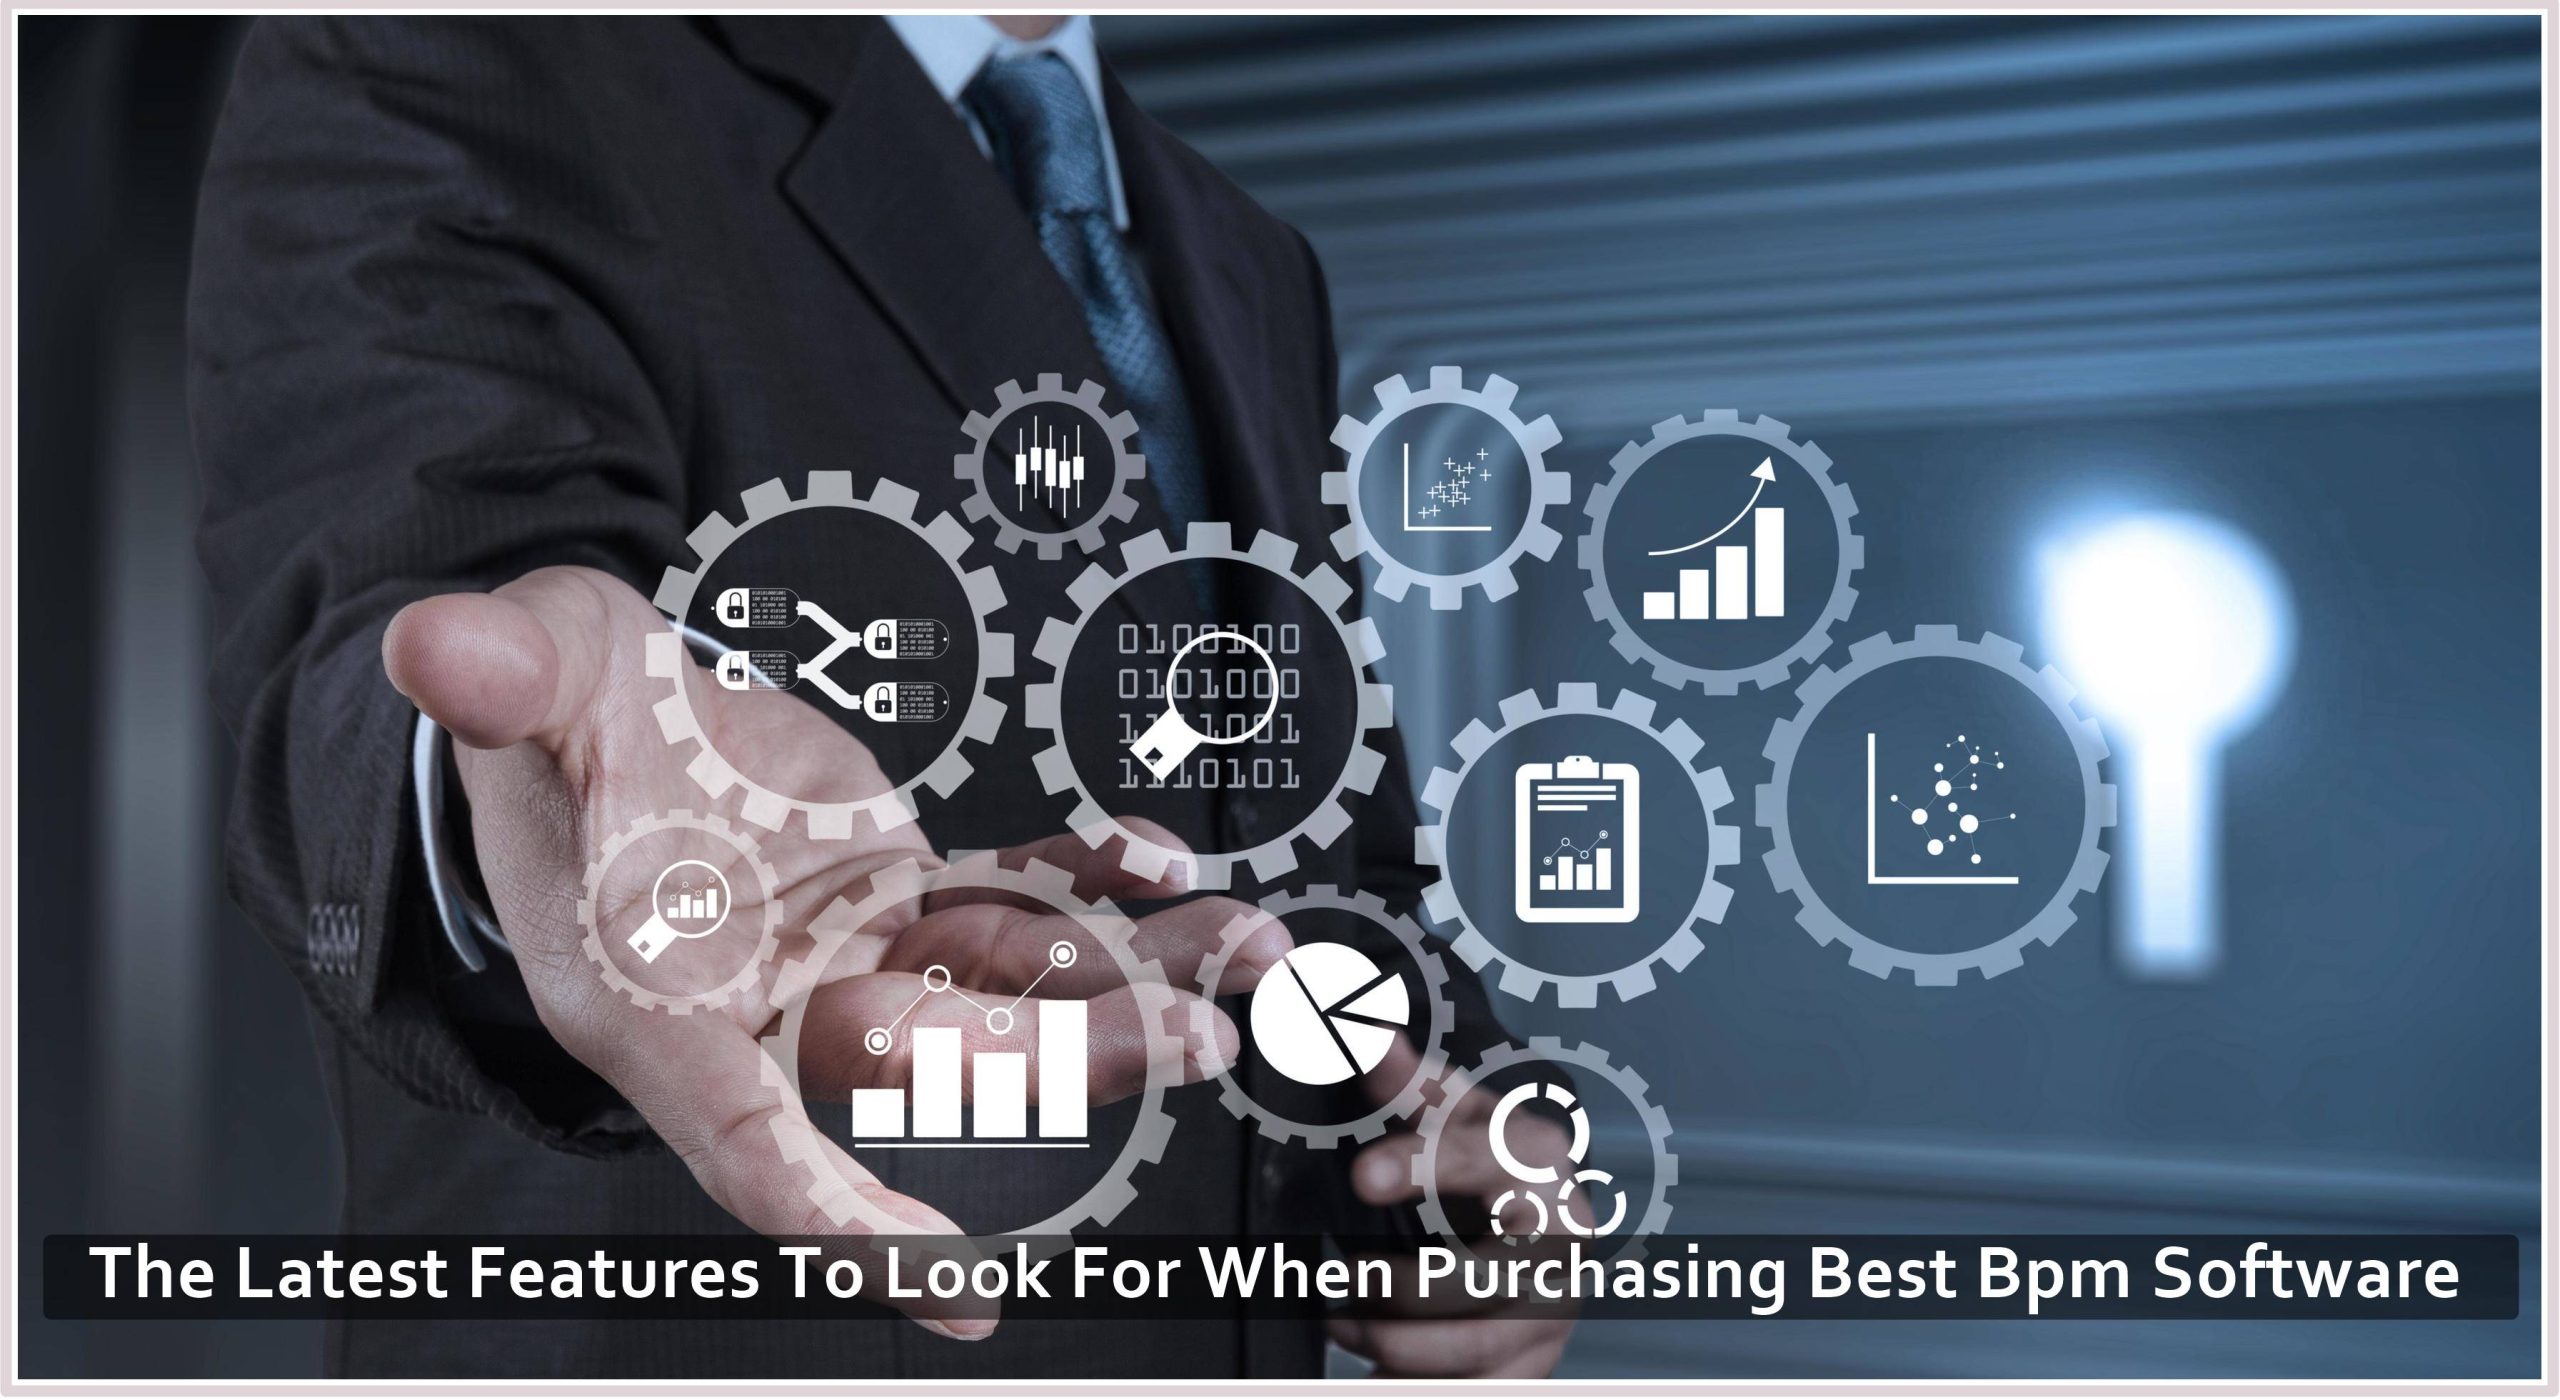 The Latest Features To Look For When Purchasing Best Bpm Software